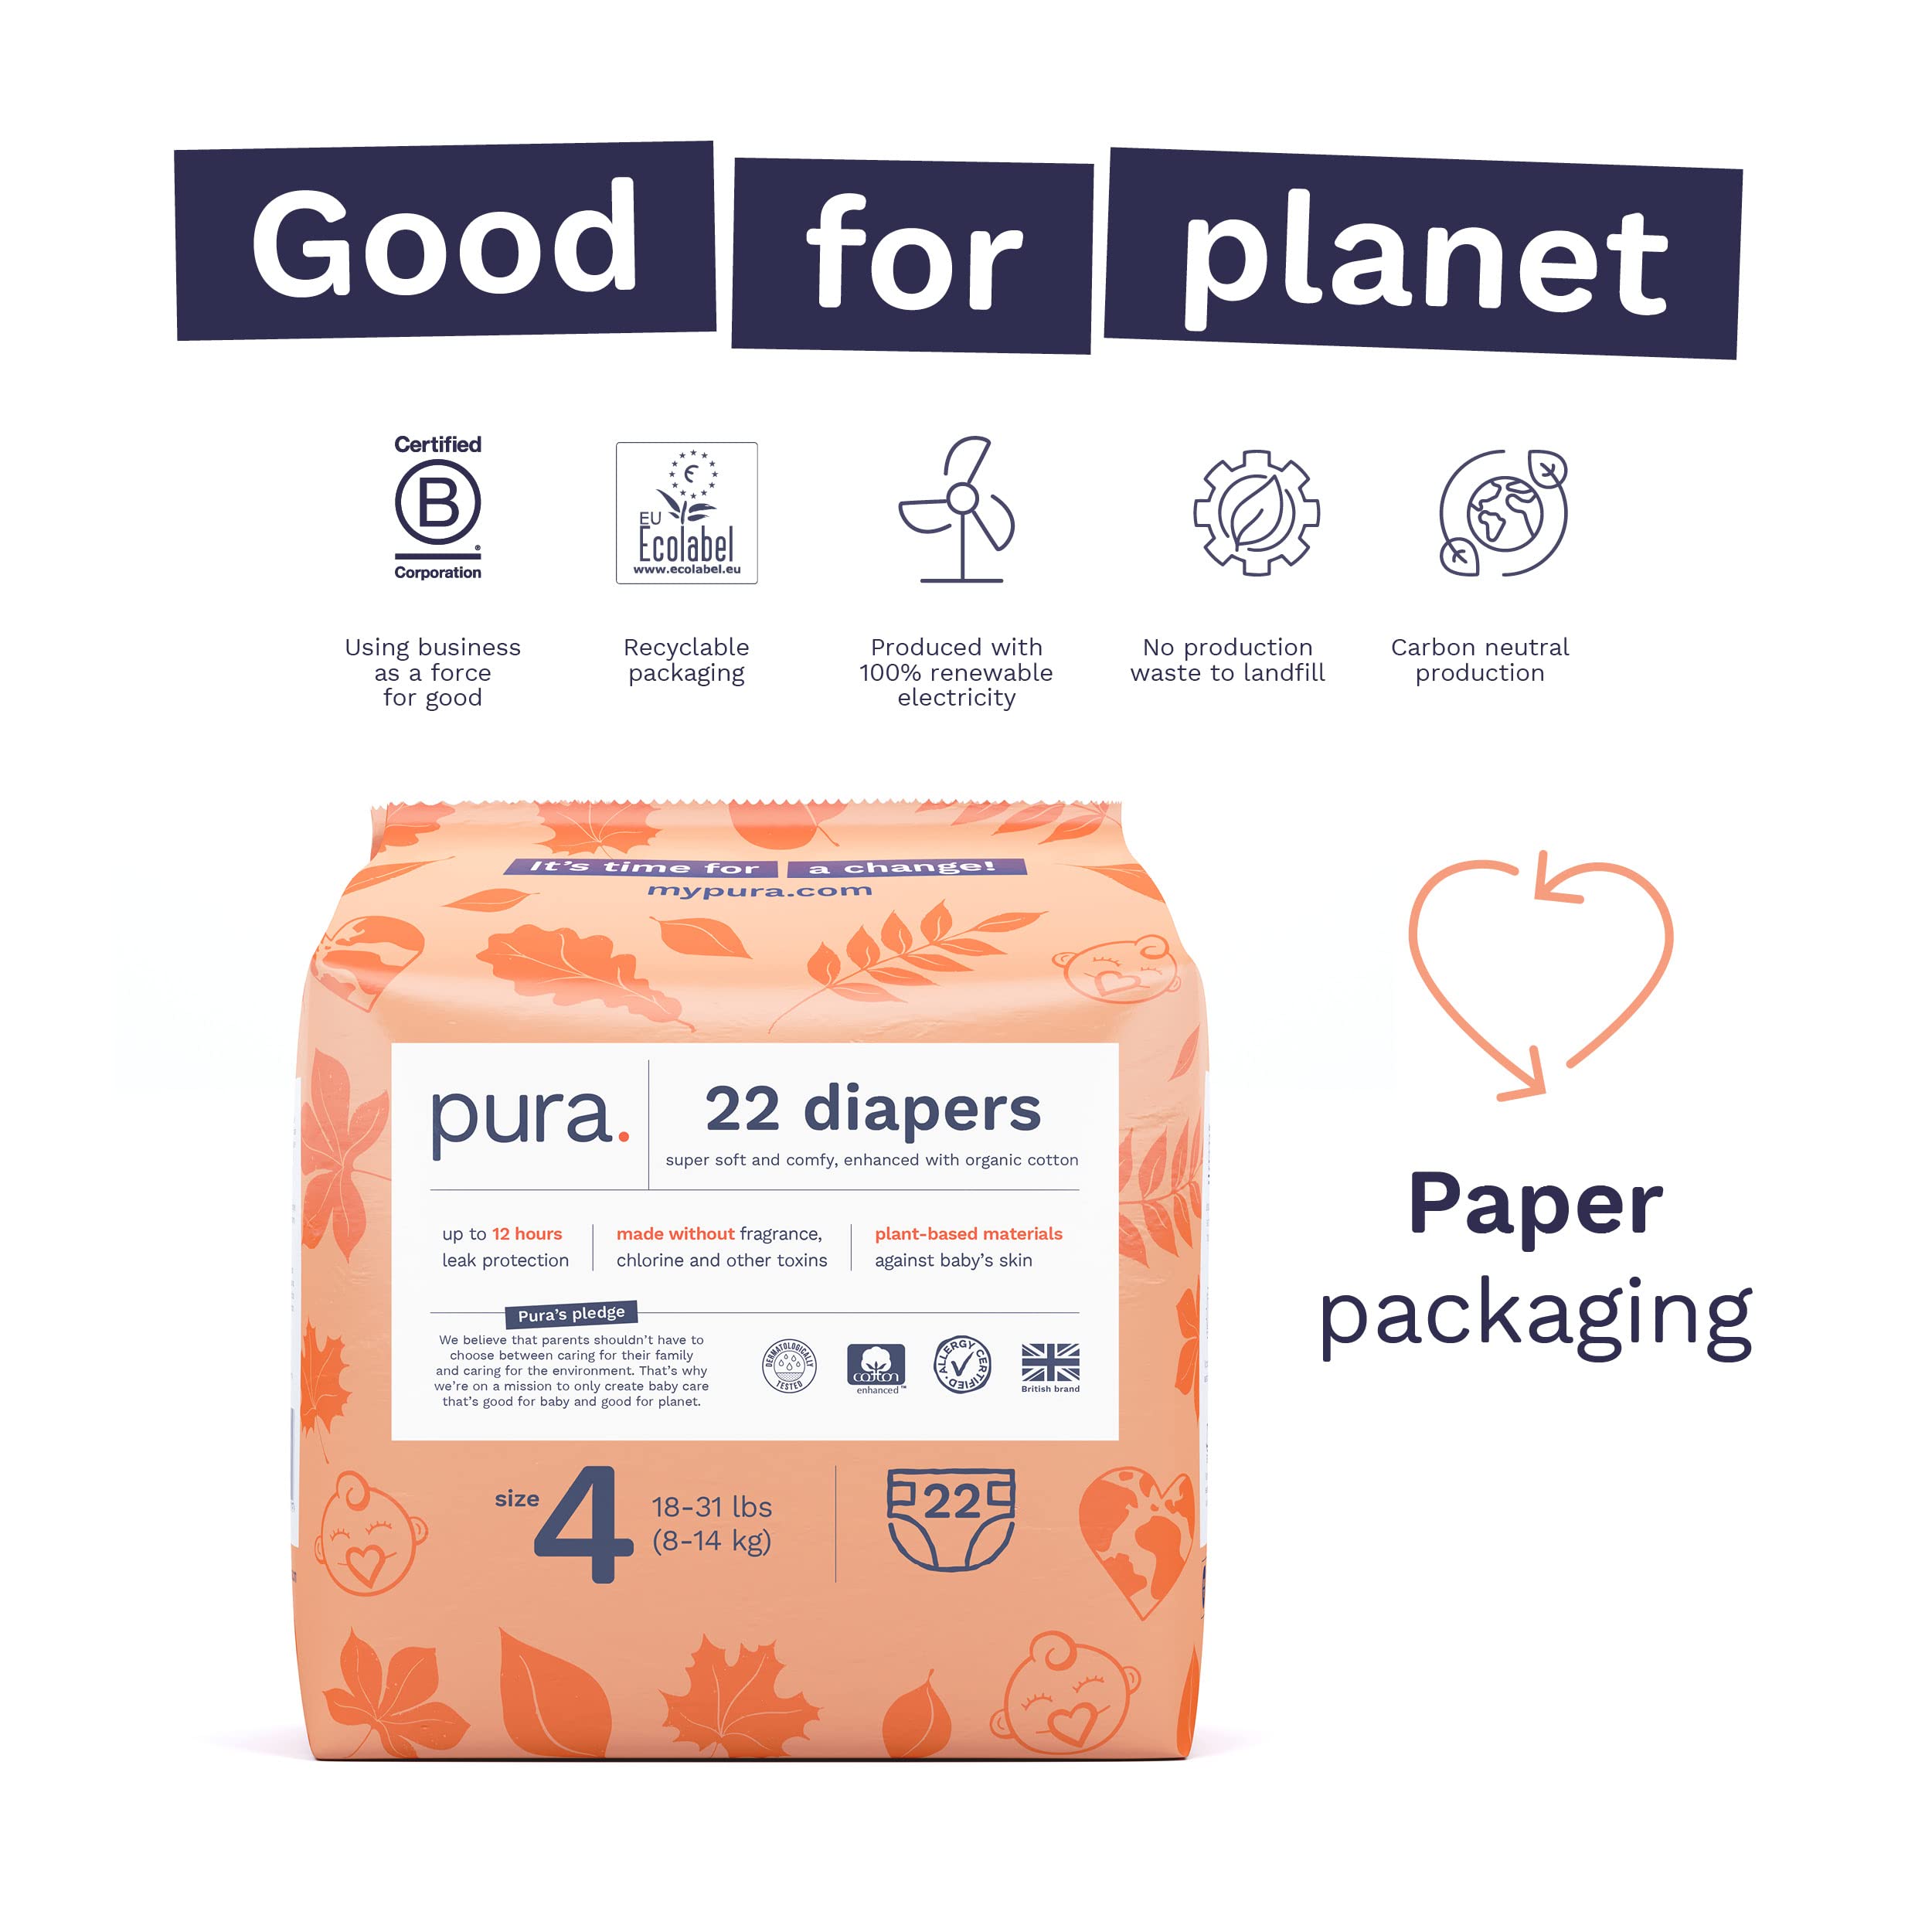 Pura Size 4 Eco-Friendly Diapers (18-31lbs) Hypoallergenic, Soft Organic Cotton, Sustainable Comfort, up to 12 Hours Leak Protection, Allergy UK, Paper Packaging 1 Pack of 22 Diapers